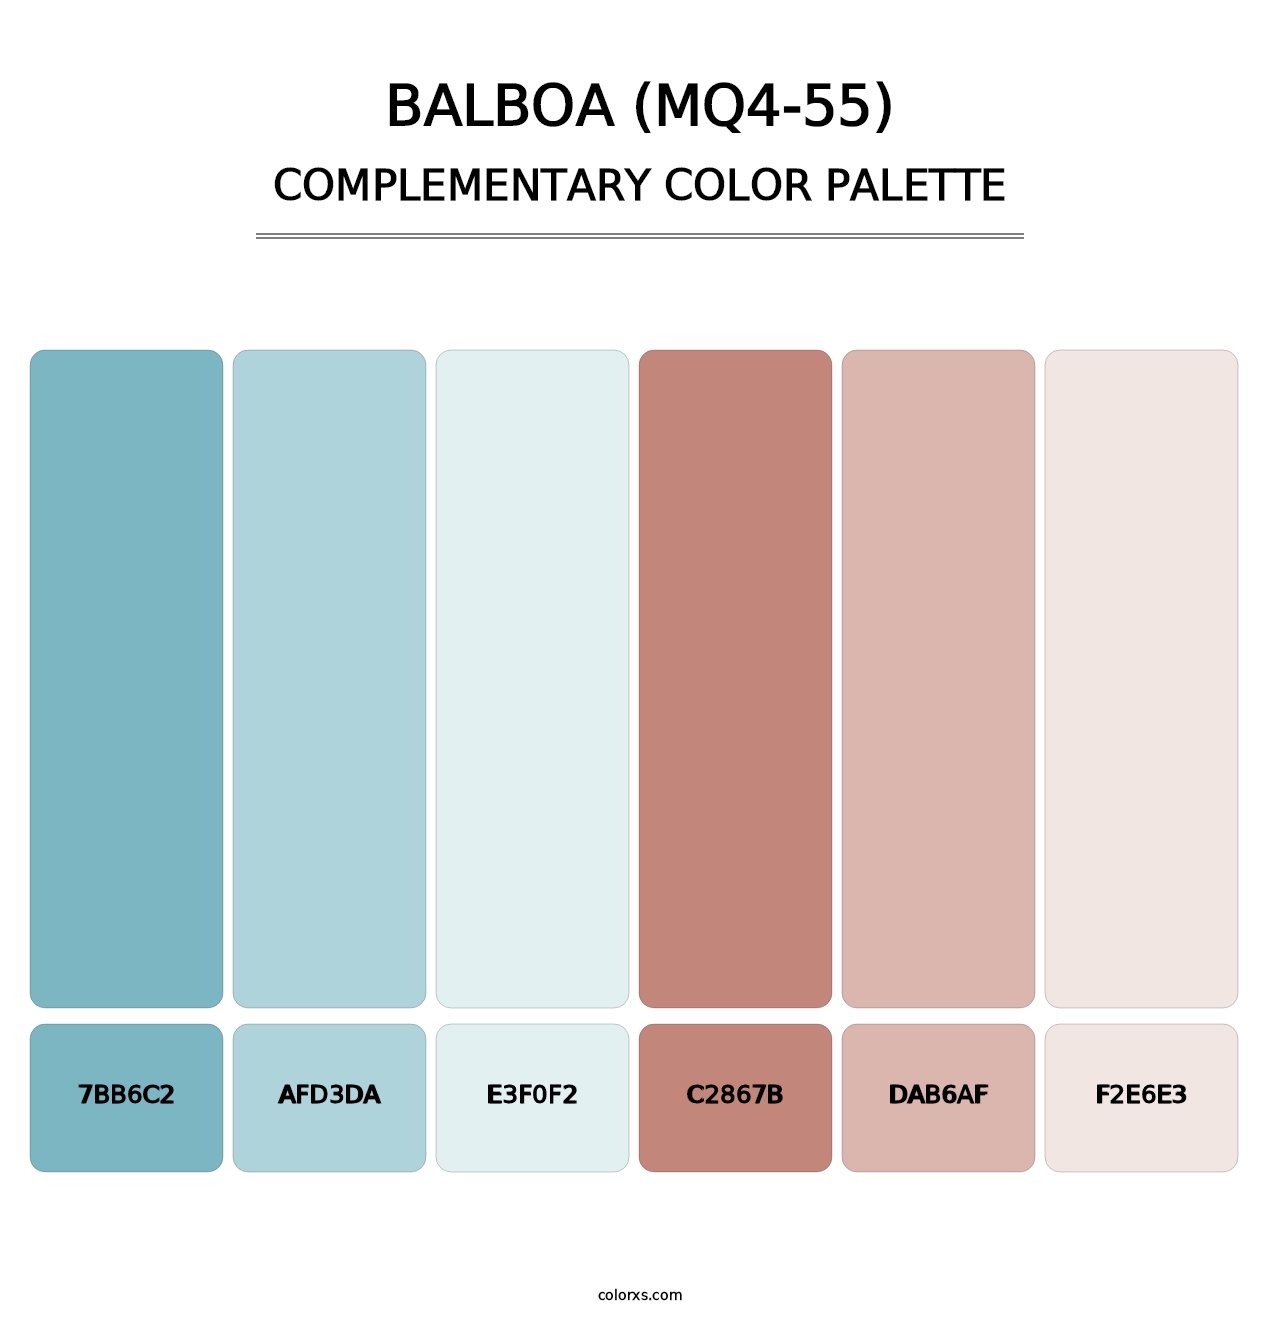 Balboa (MQ4-55) - Complementary Color Palette